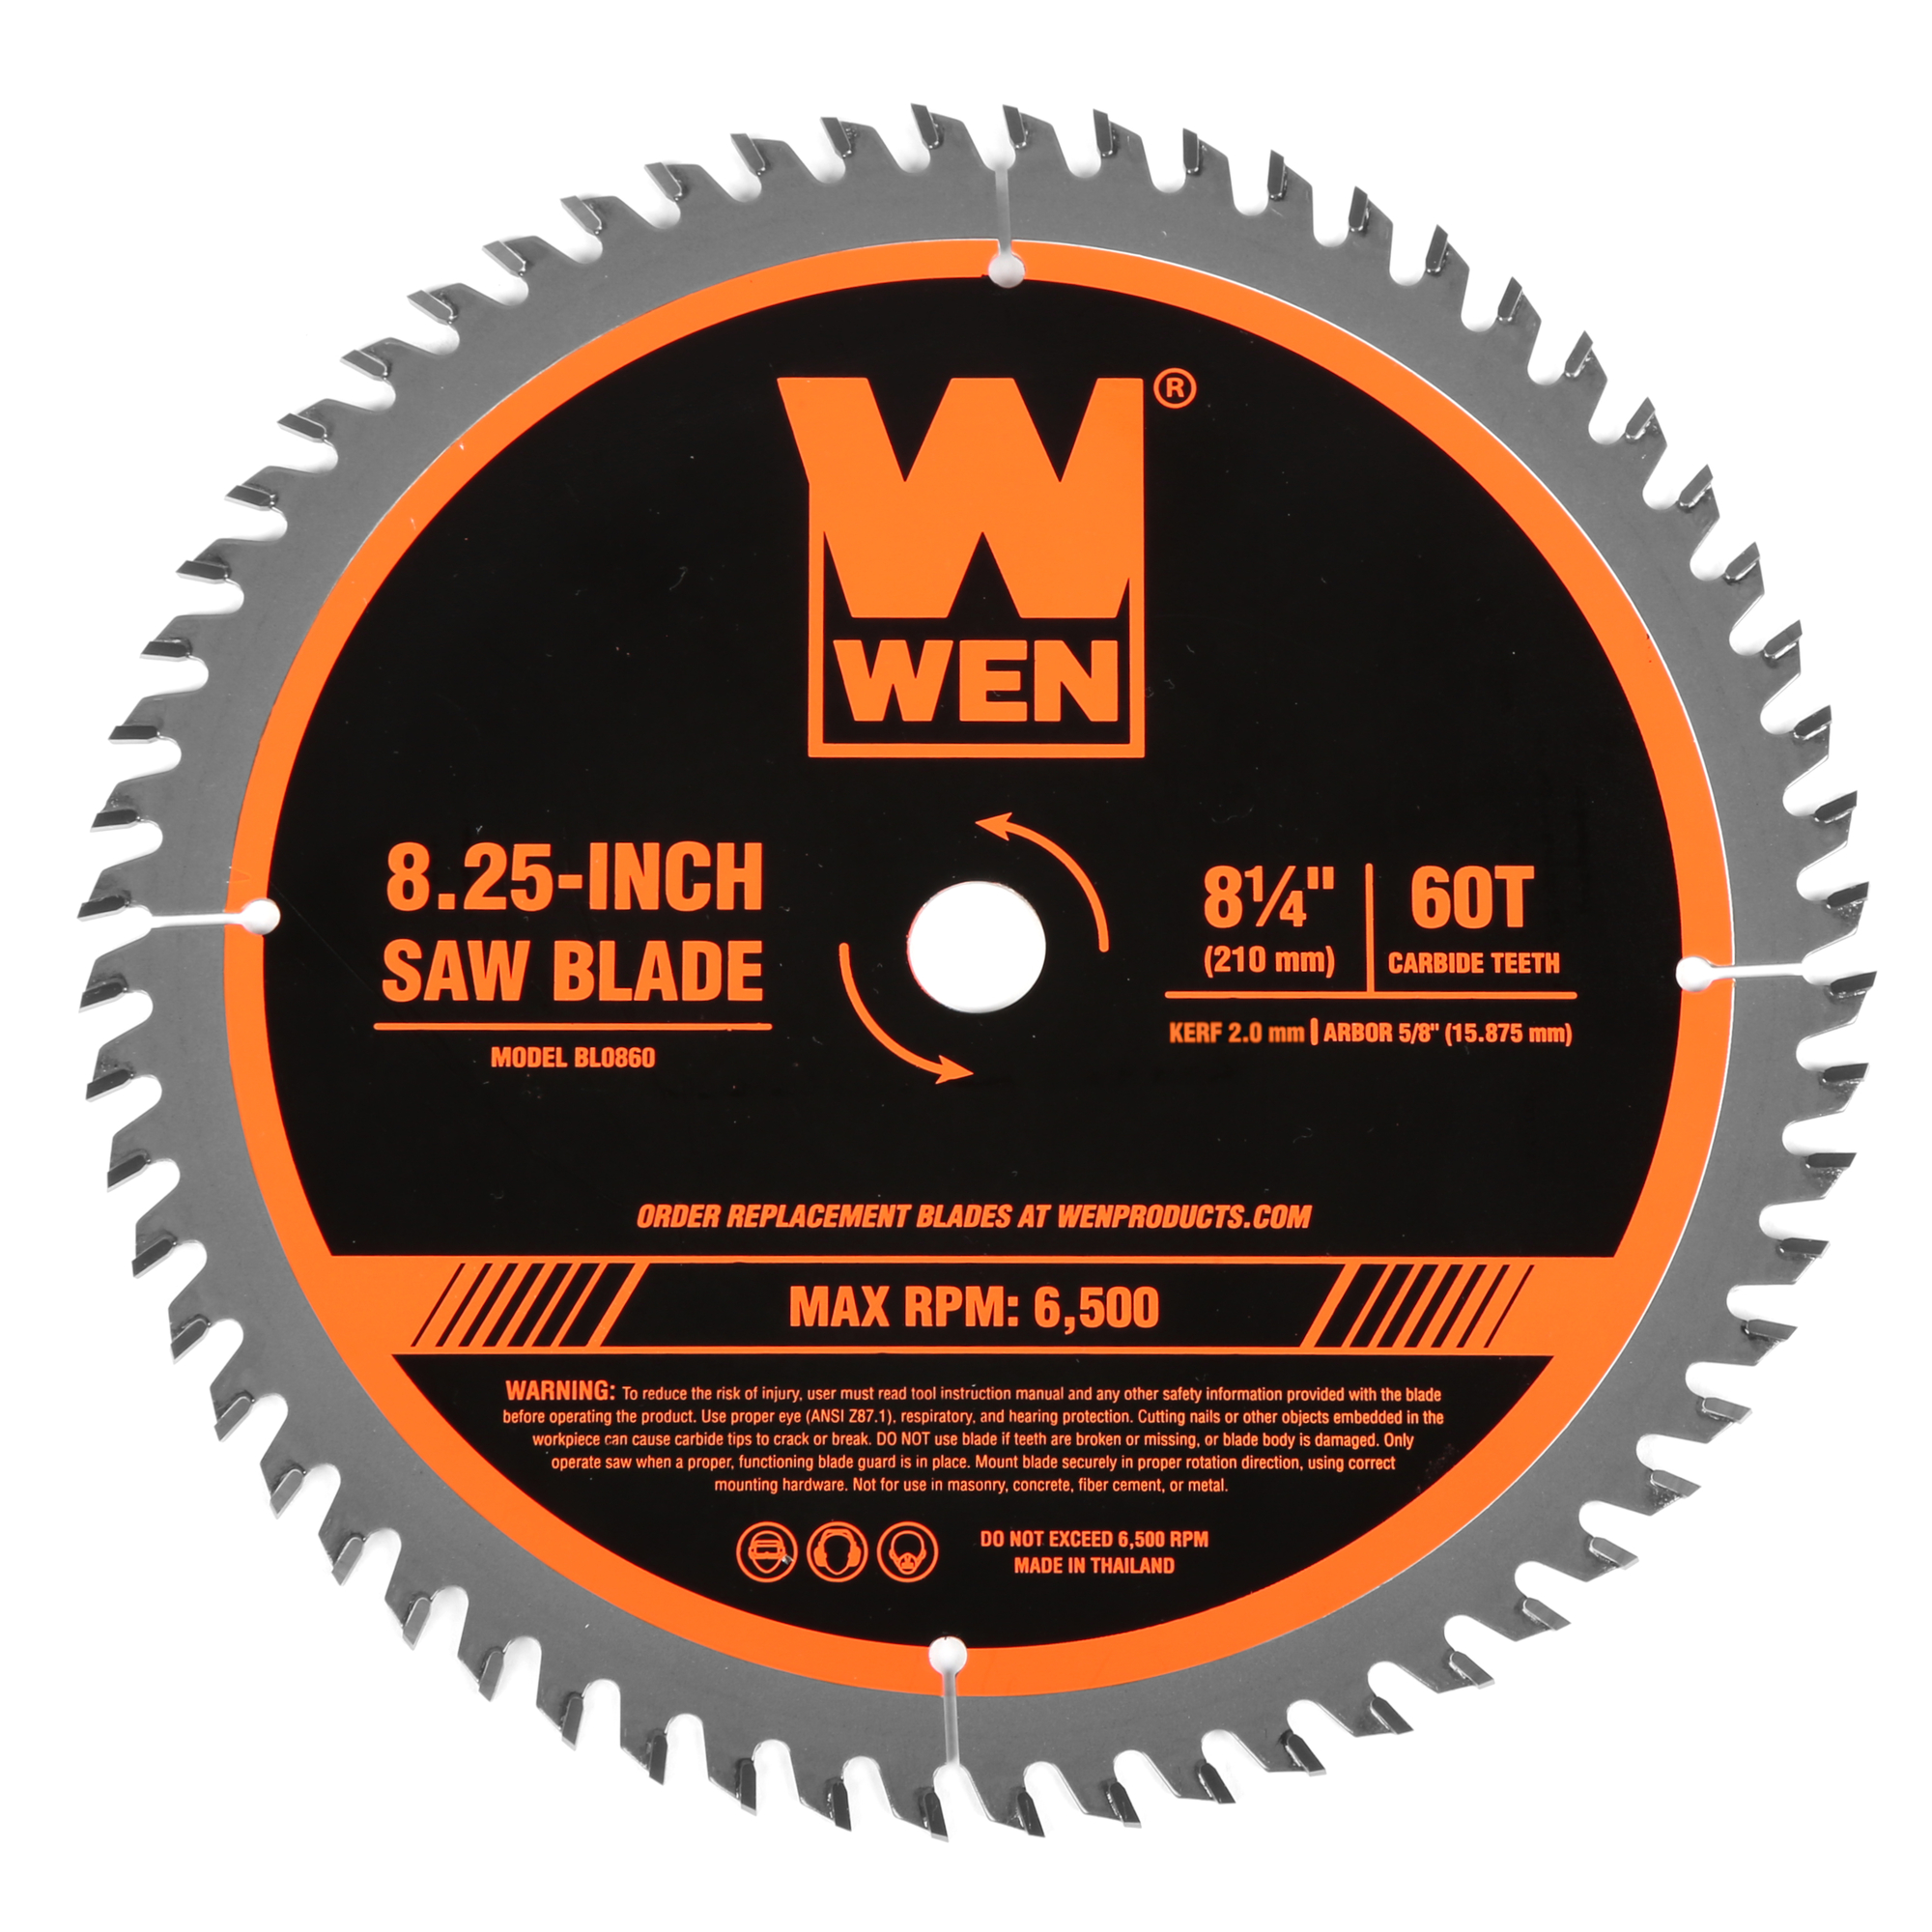 WEN, 8.25Inch 60-Tooth Carbide-Tipped Circular Saw Blade, Blade Diameter 8 1/2 in, Included (qty.) 1, Model BL0860